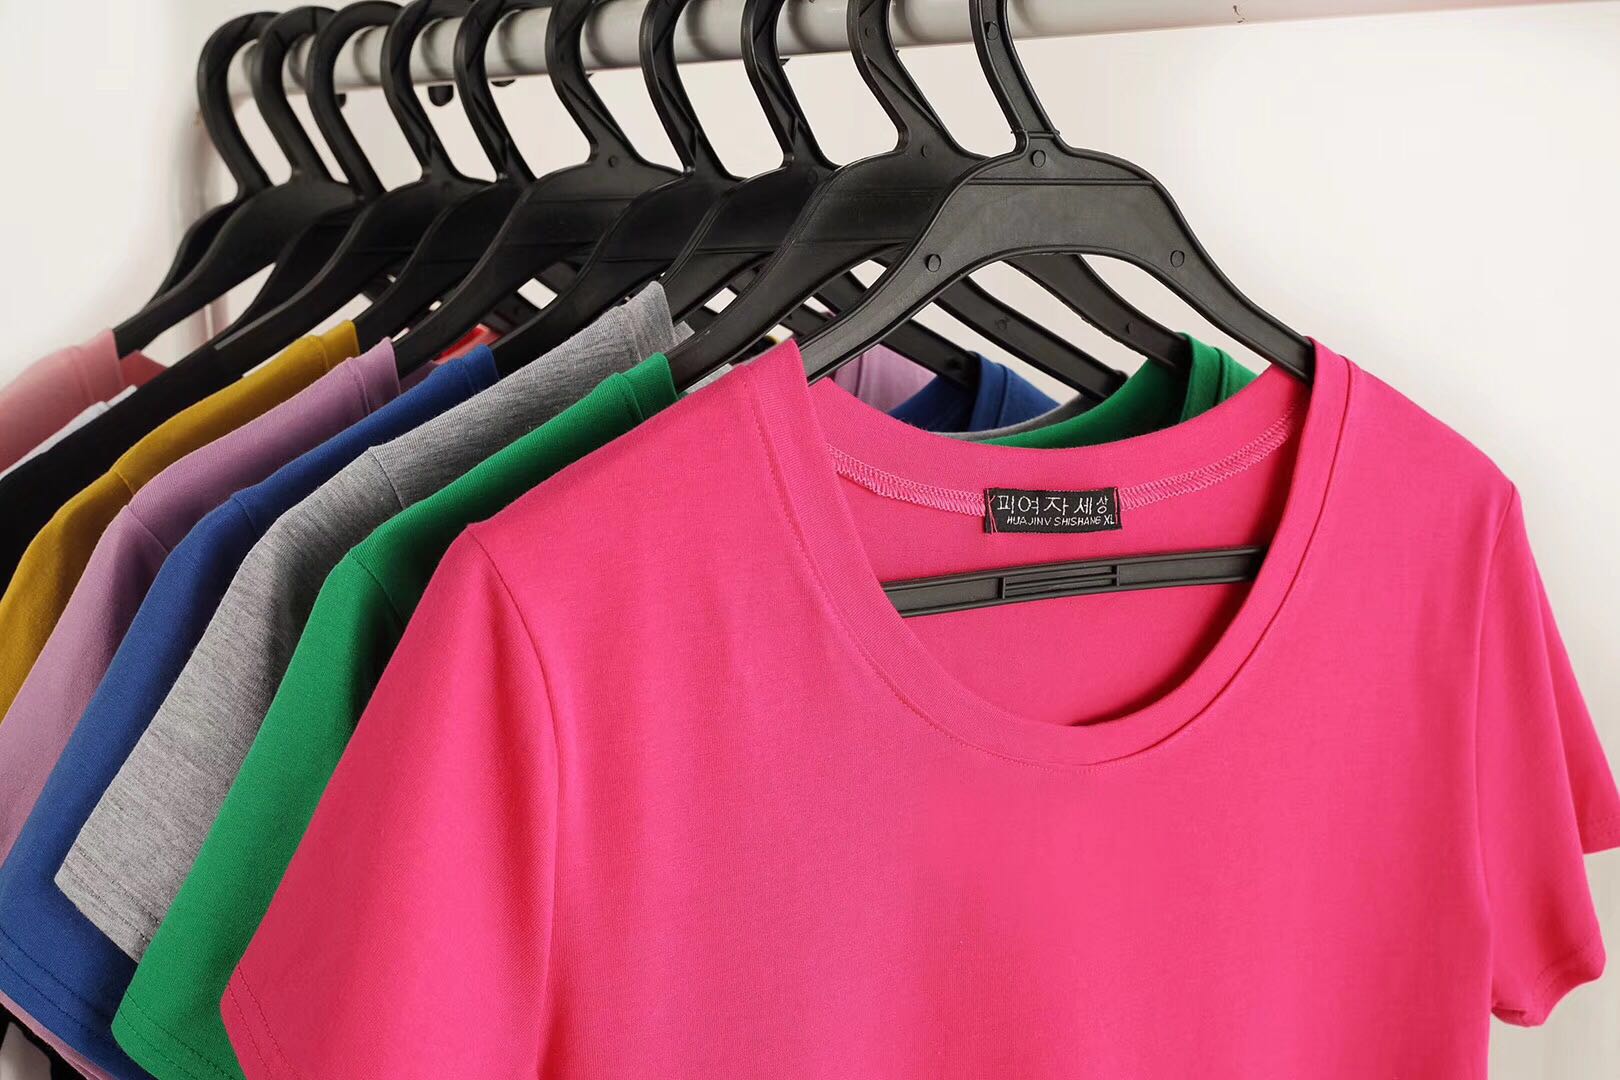 https://www.business-in-guangzhou.com/wp-content/uploads/2019/01/Wholesale-O-neck-T-shirts-from-China-Shirts-Manufacturer.jpg